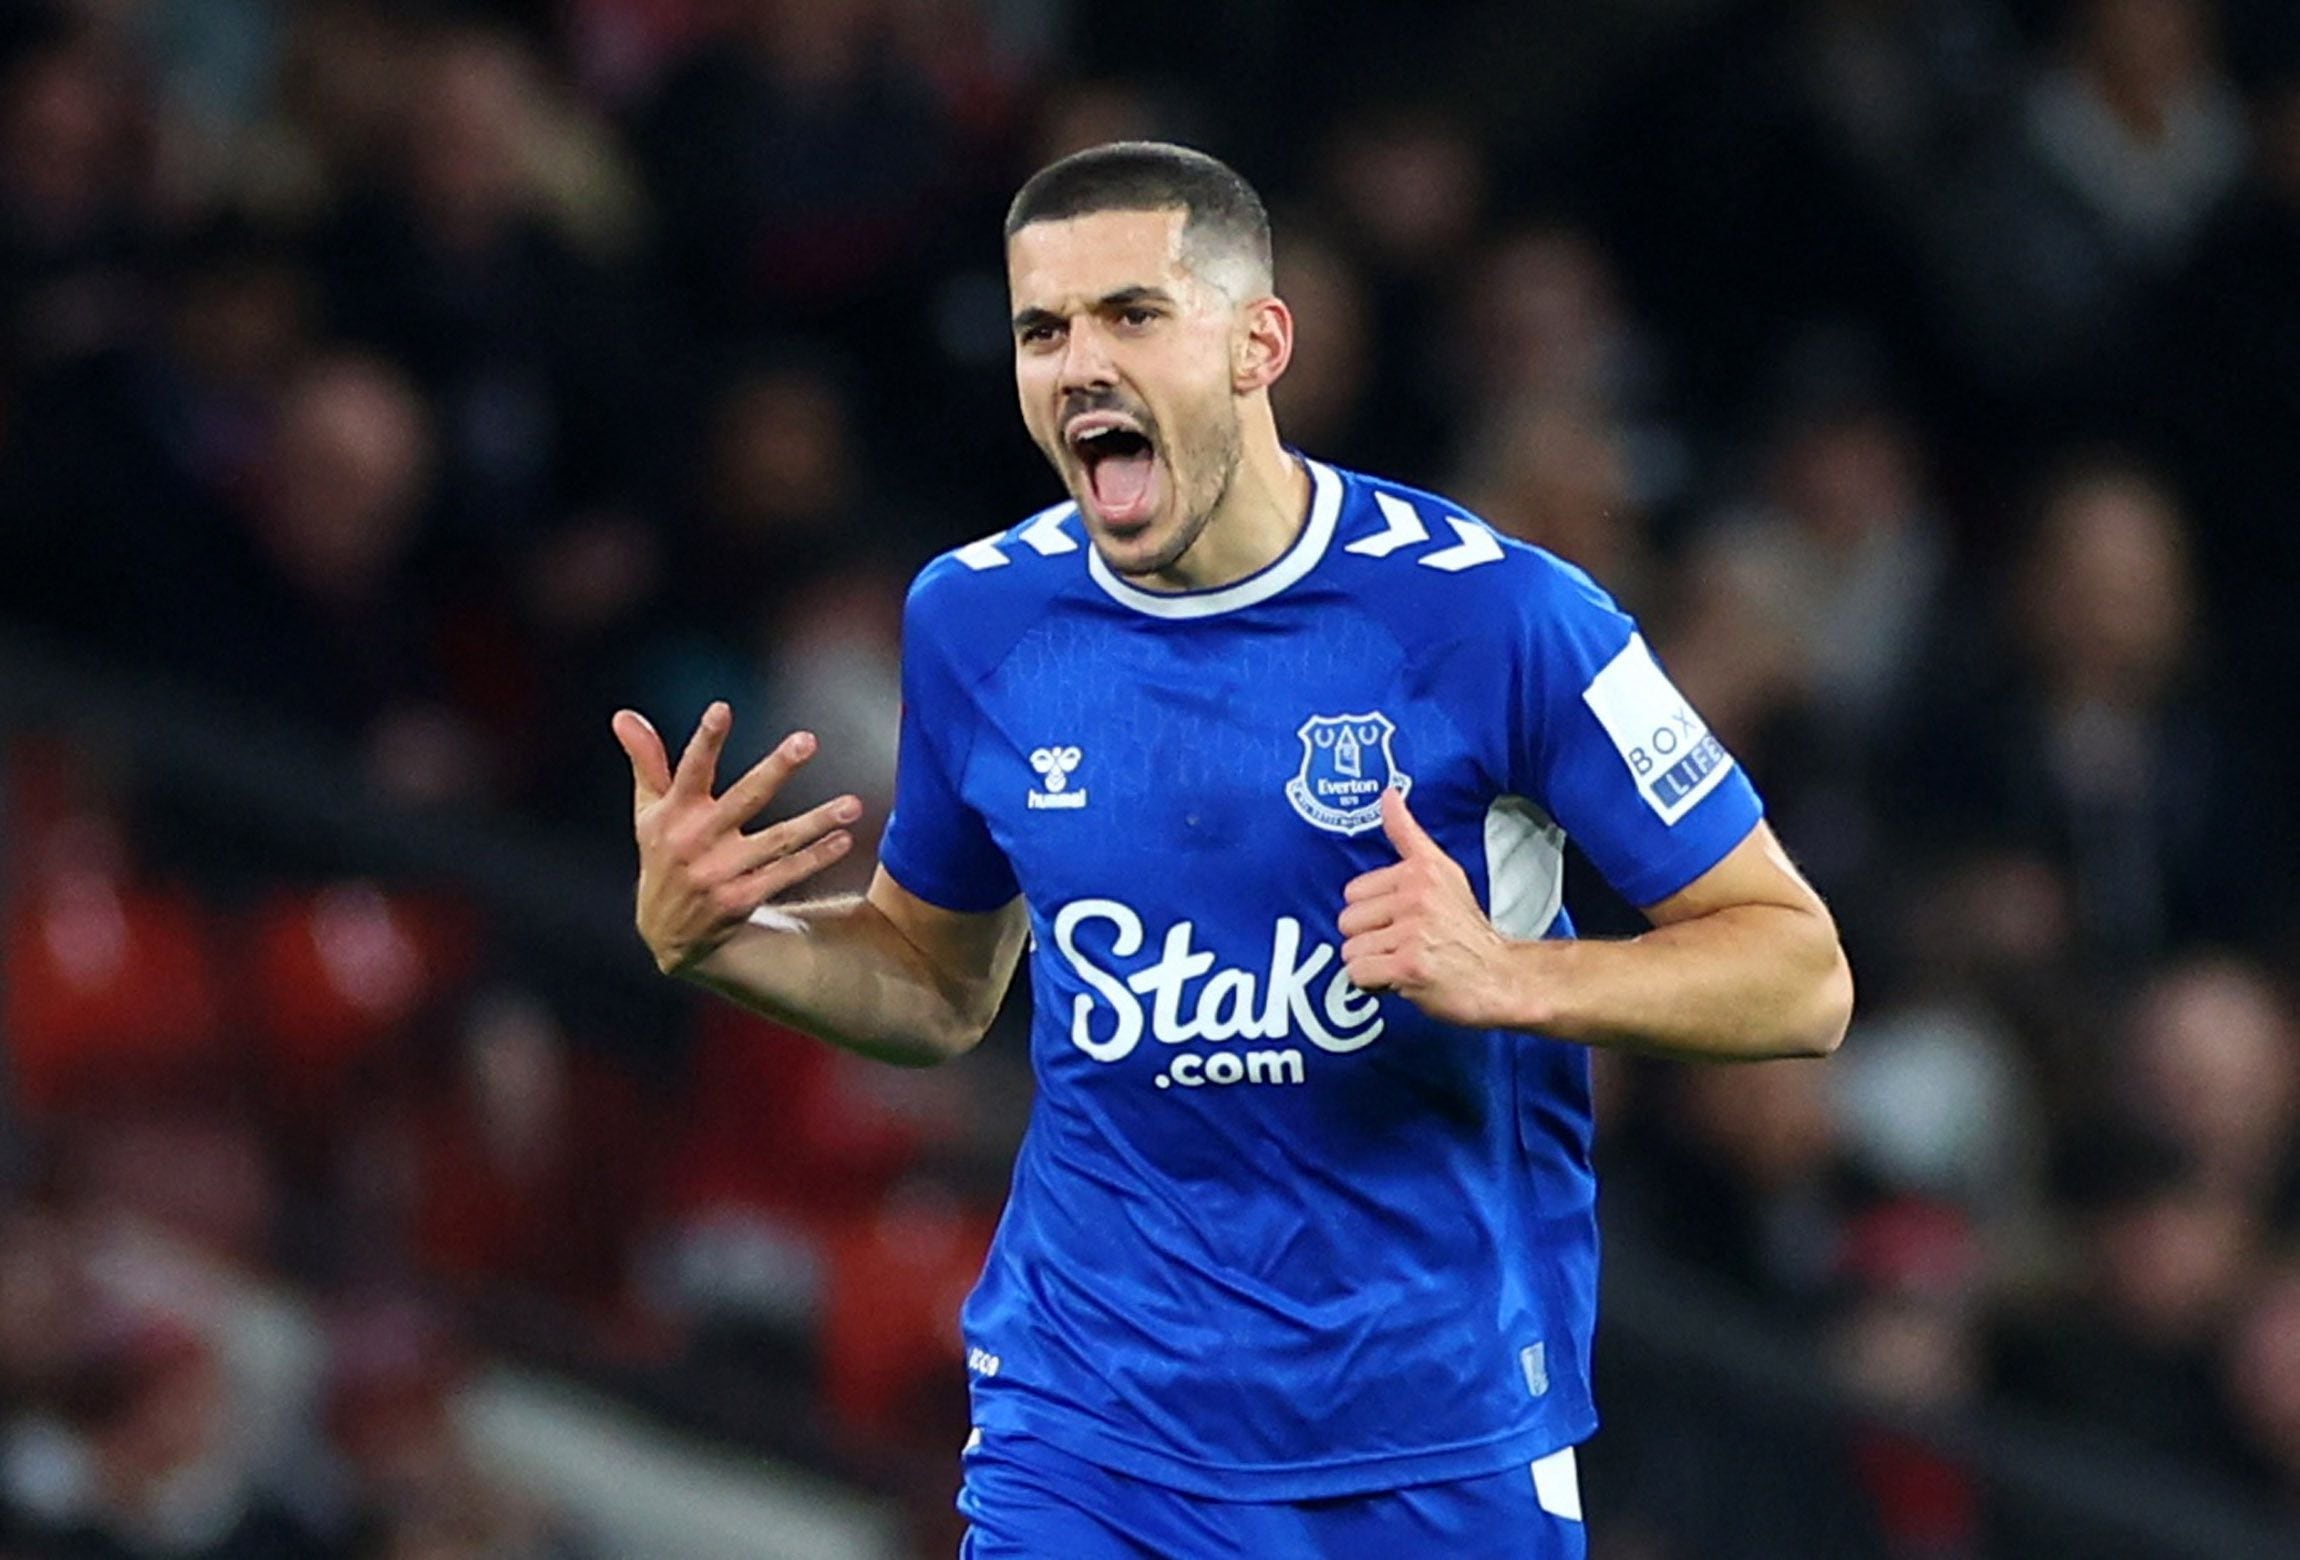 Soccer Football - FA Cup Third Round - Manchester United v Everton - Old Trafford, Manchester, Britain - January 6, 2023 Everton's Conor Coady celebrates scoring their first goal REUTERS/Carl Recine